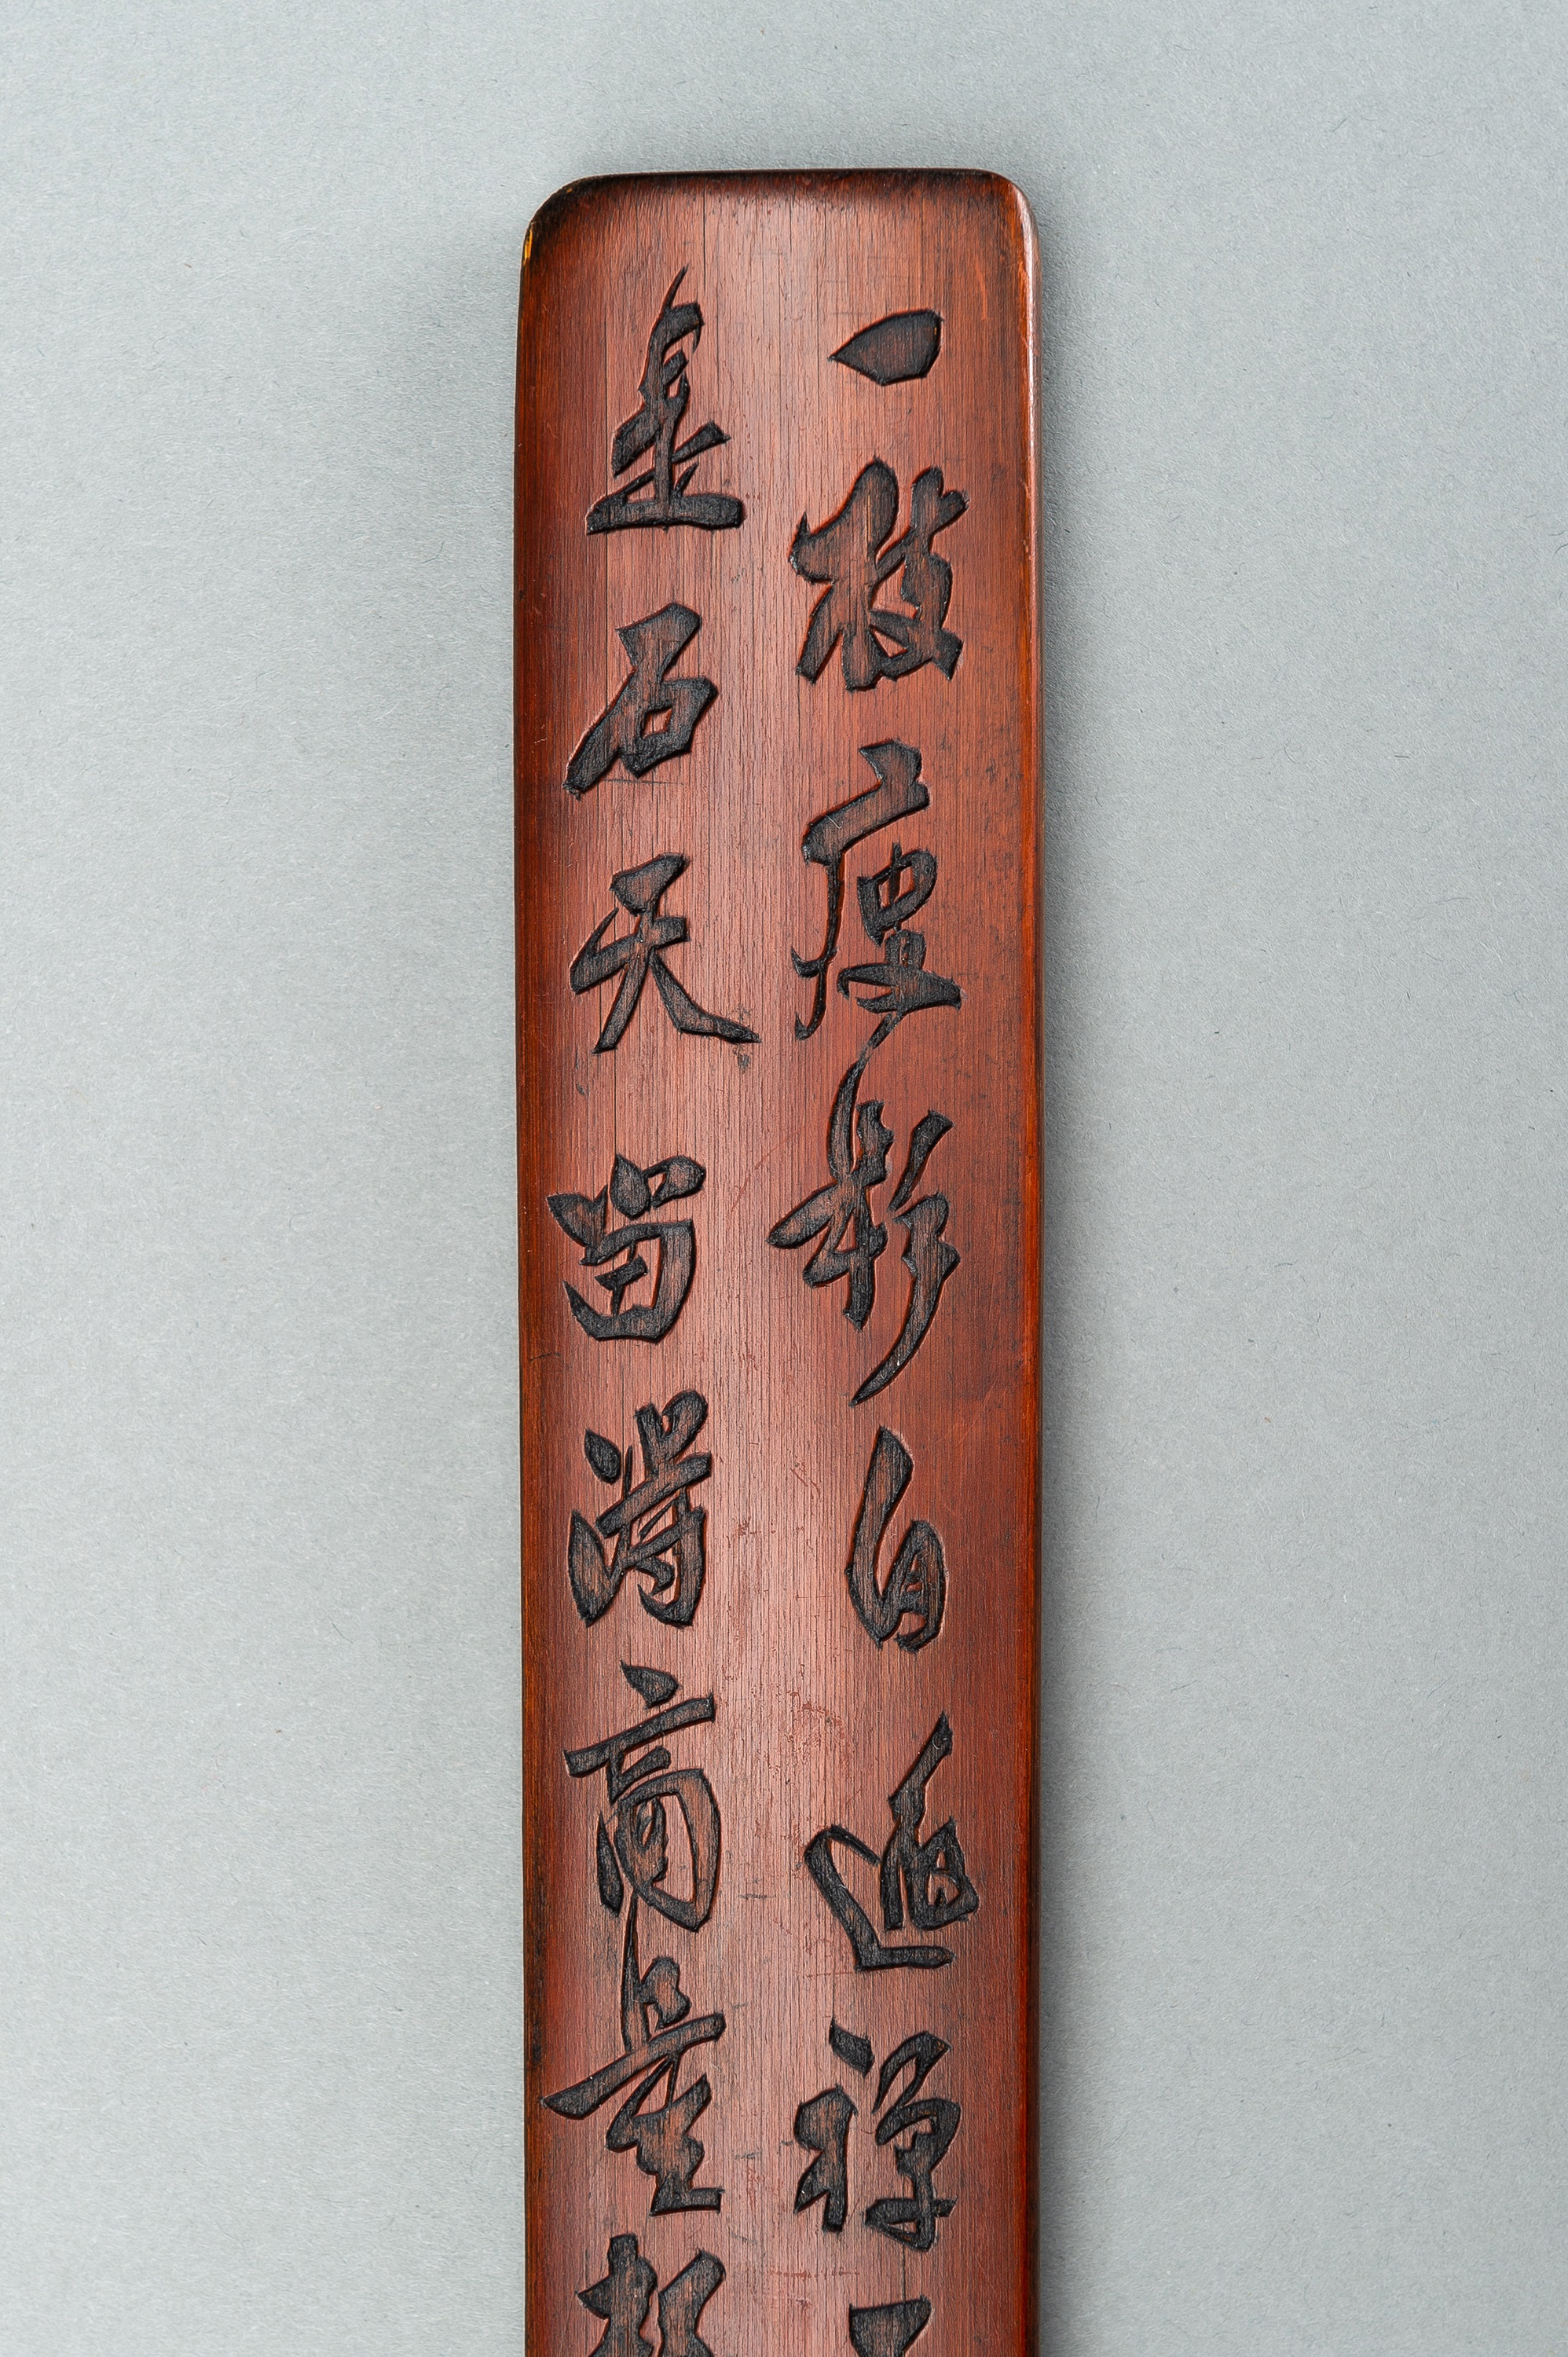 A BAMBOO WRIST REST WITH CALIGRAPHY - Image 4 of 9